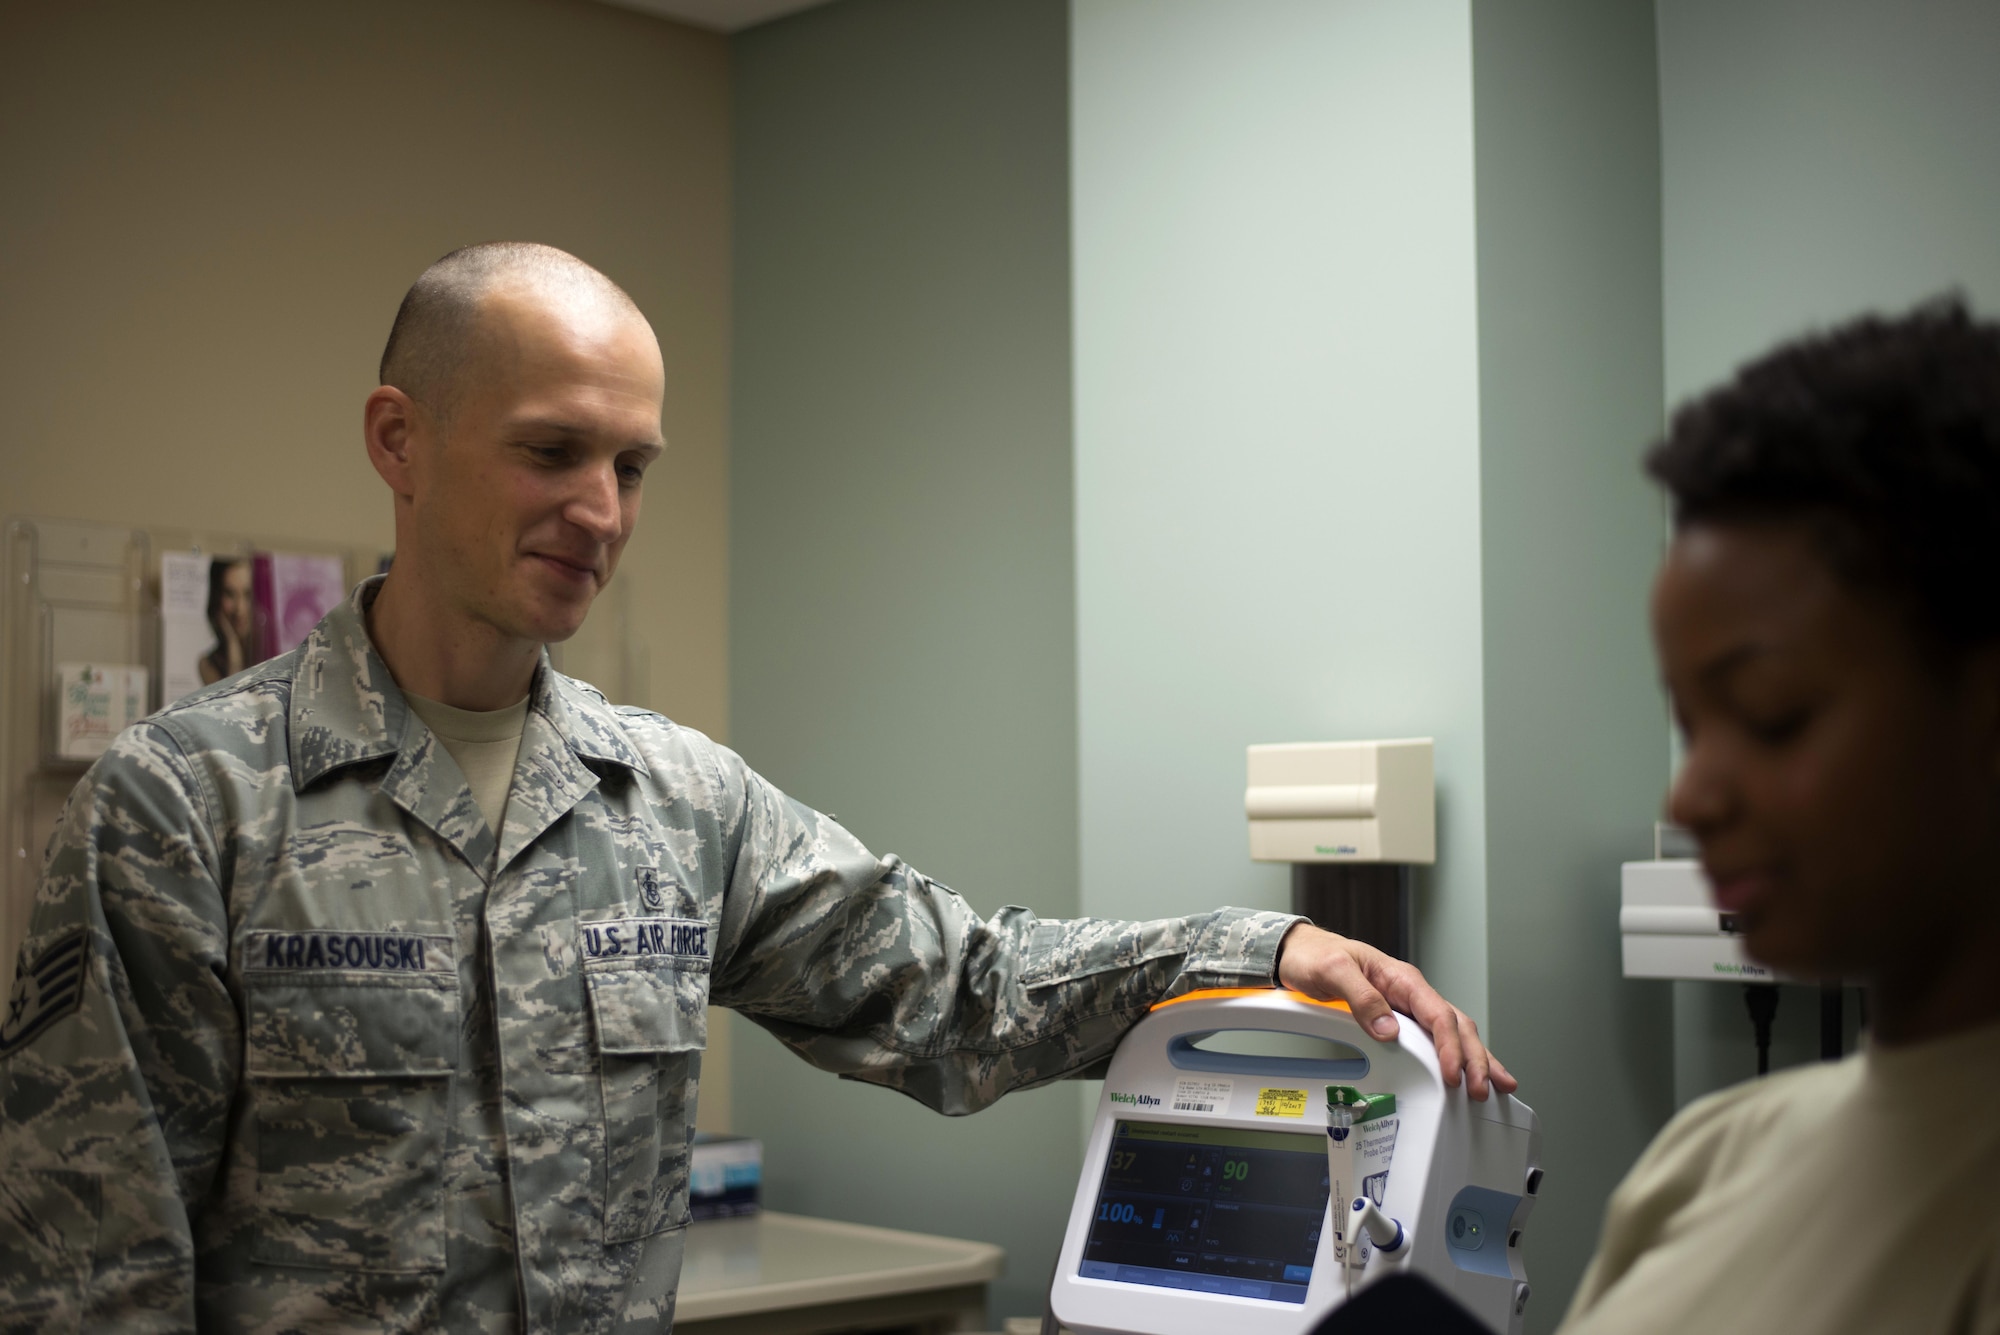 U.S. Air Force Staff Sgt. Aliaksei Krasouski, a medical technician assigned to the 91st Air Refueling Squadron, prepares to check the vitals of a patient March 8, 2017, at MacDill Air Force Base, Fla. Krasouski served in the Belarussian Air Force before coming to the U.S. 10 years ago. (U.S. Air Force Photo by Airman 1st Class Rito Smith) 